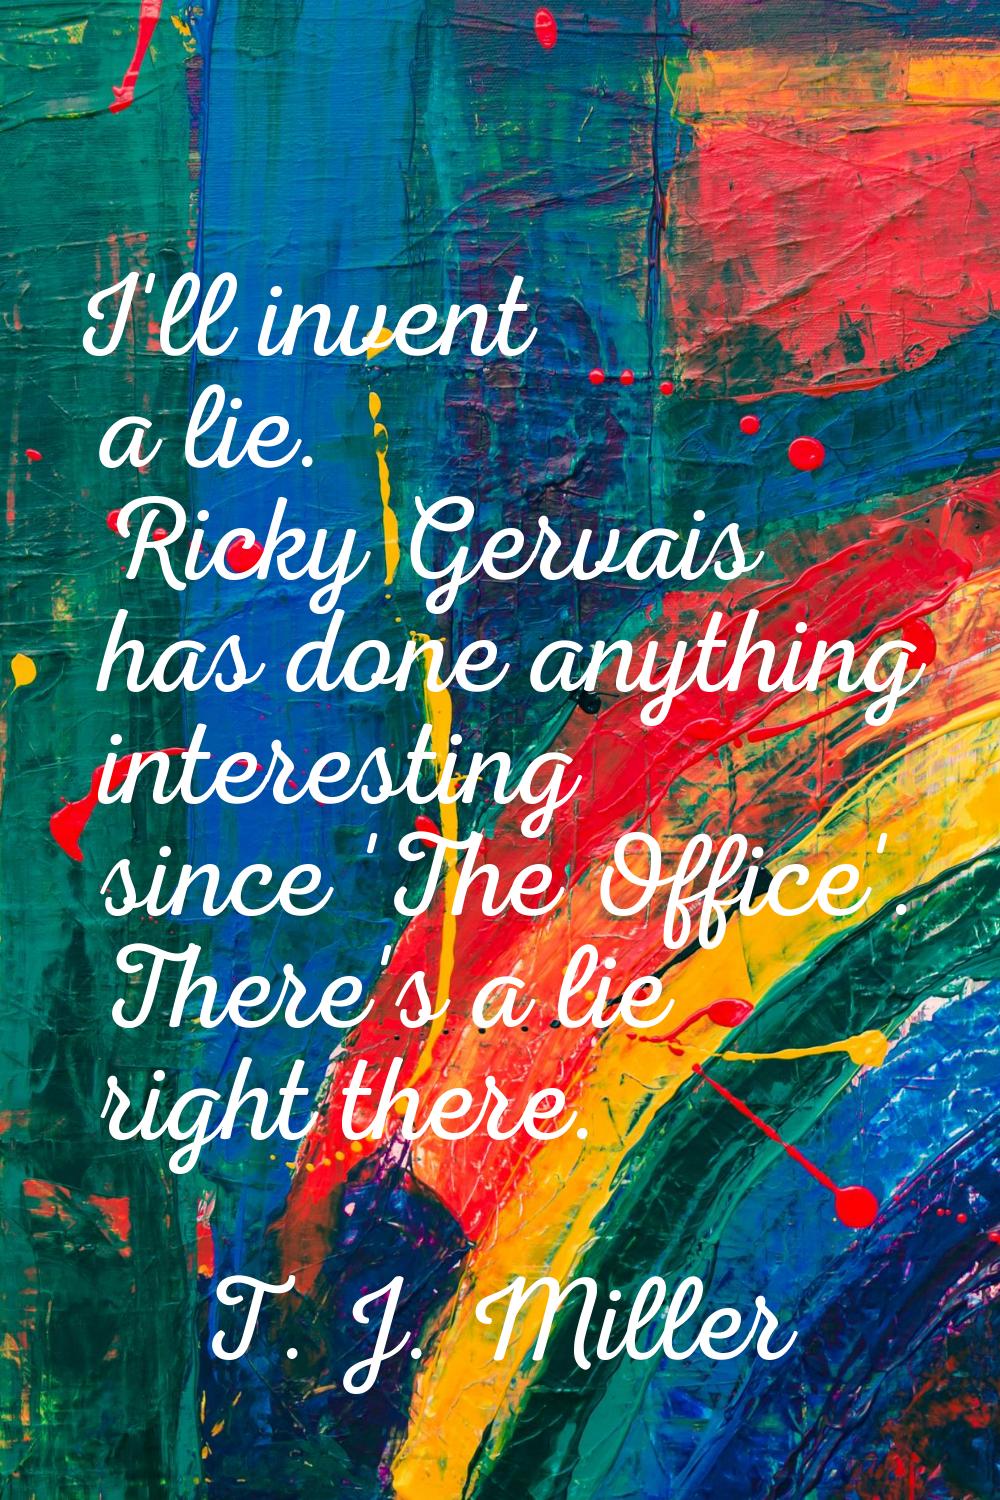 I'll invent a lie. Ricky Gervais has done anything interesting since 'The Office'. There's a lie ri